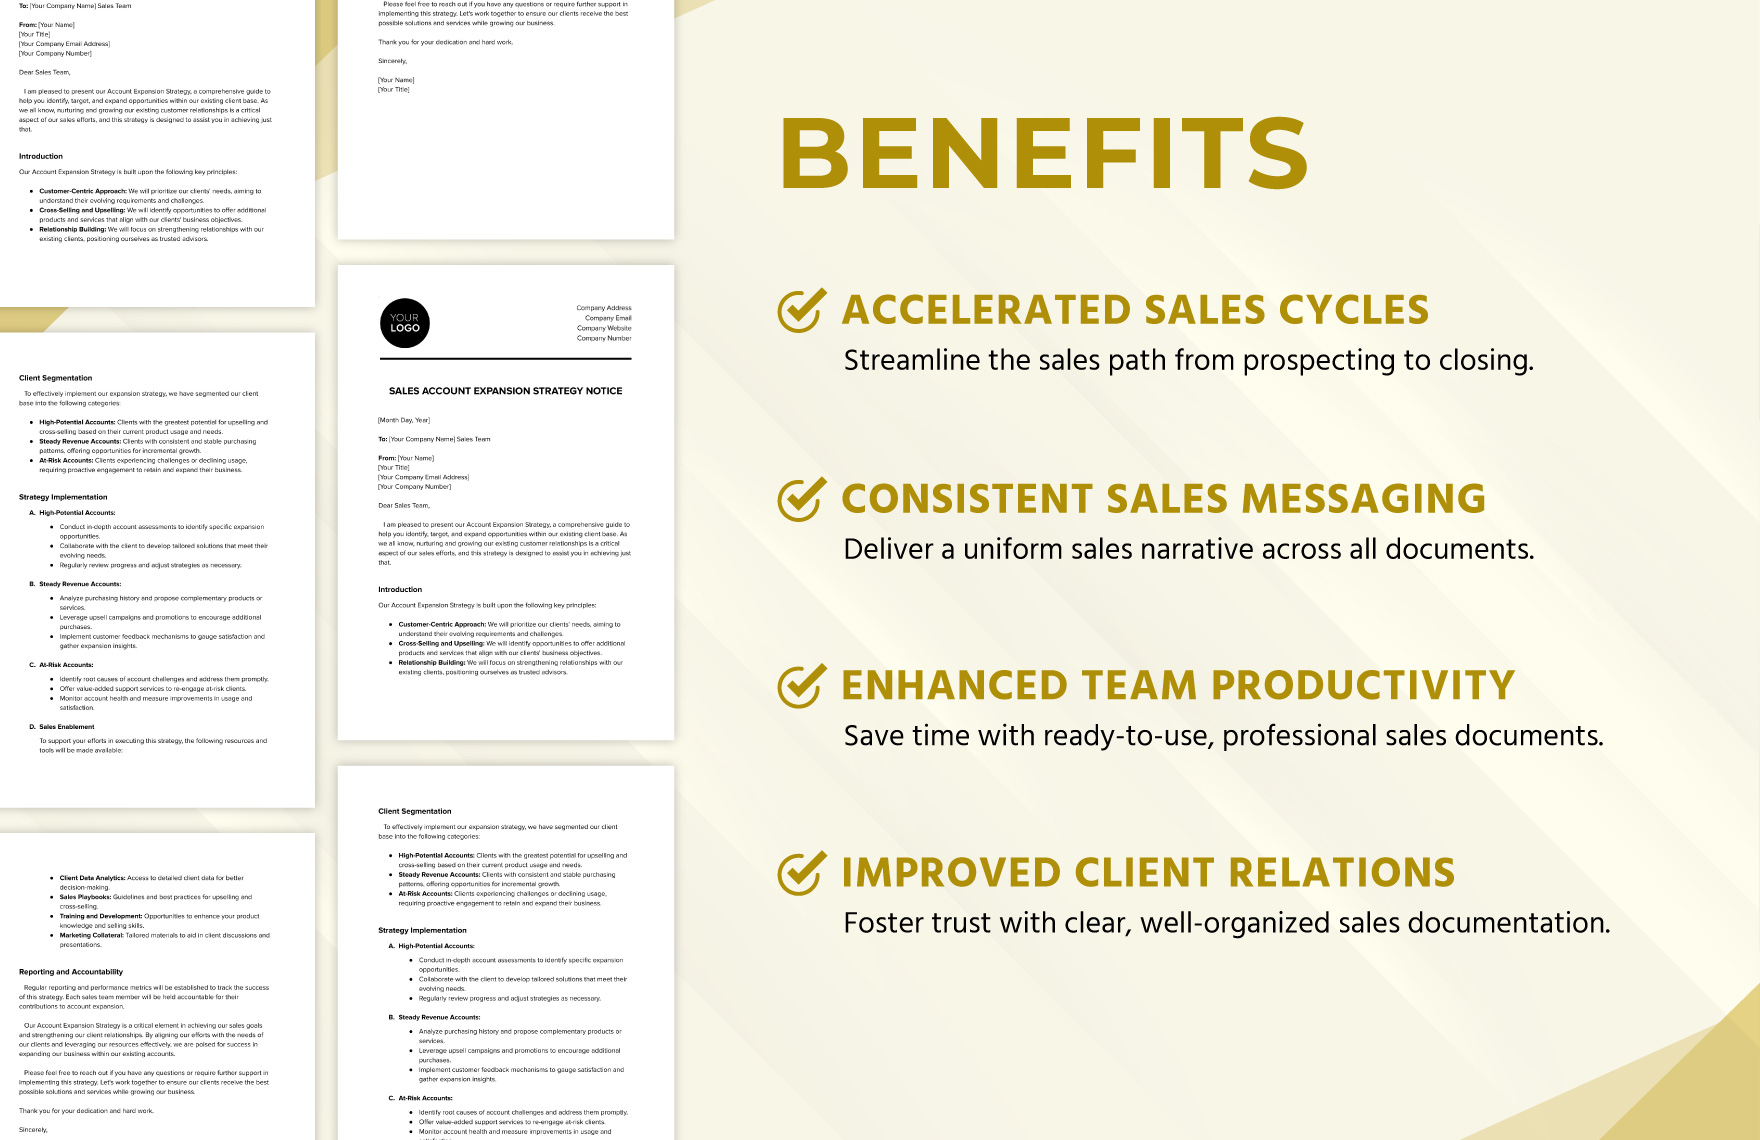 Sales Account Expansion Strategy Notice Template